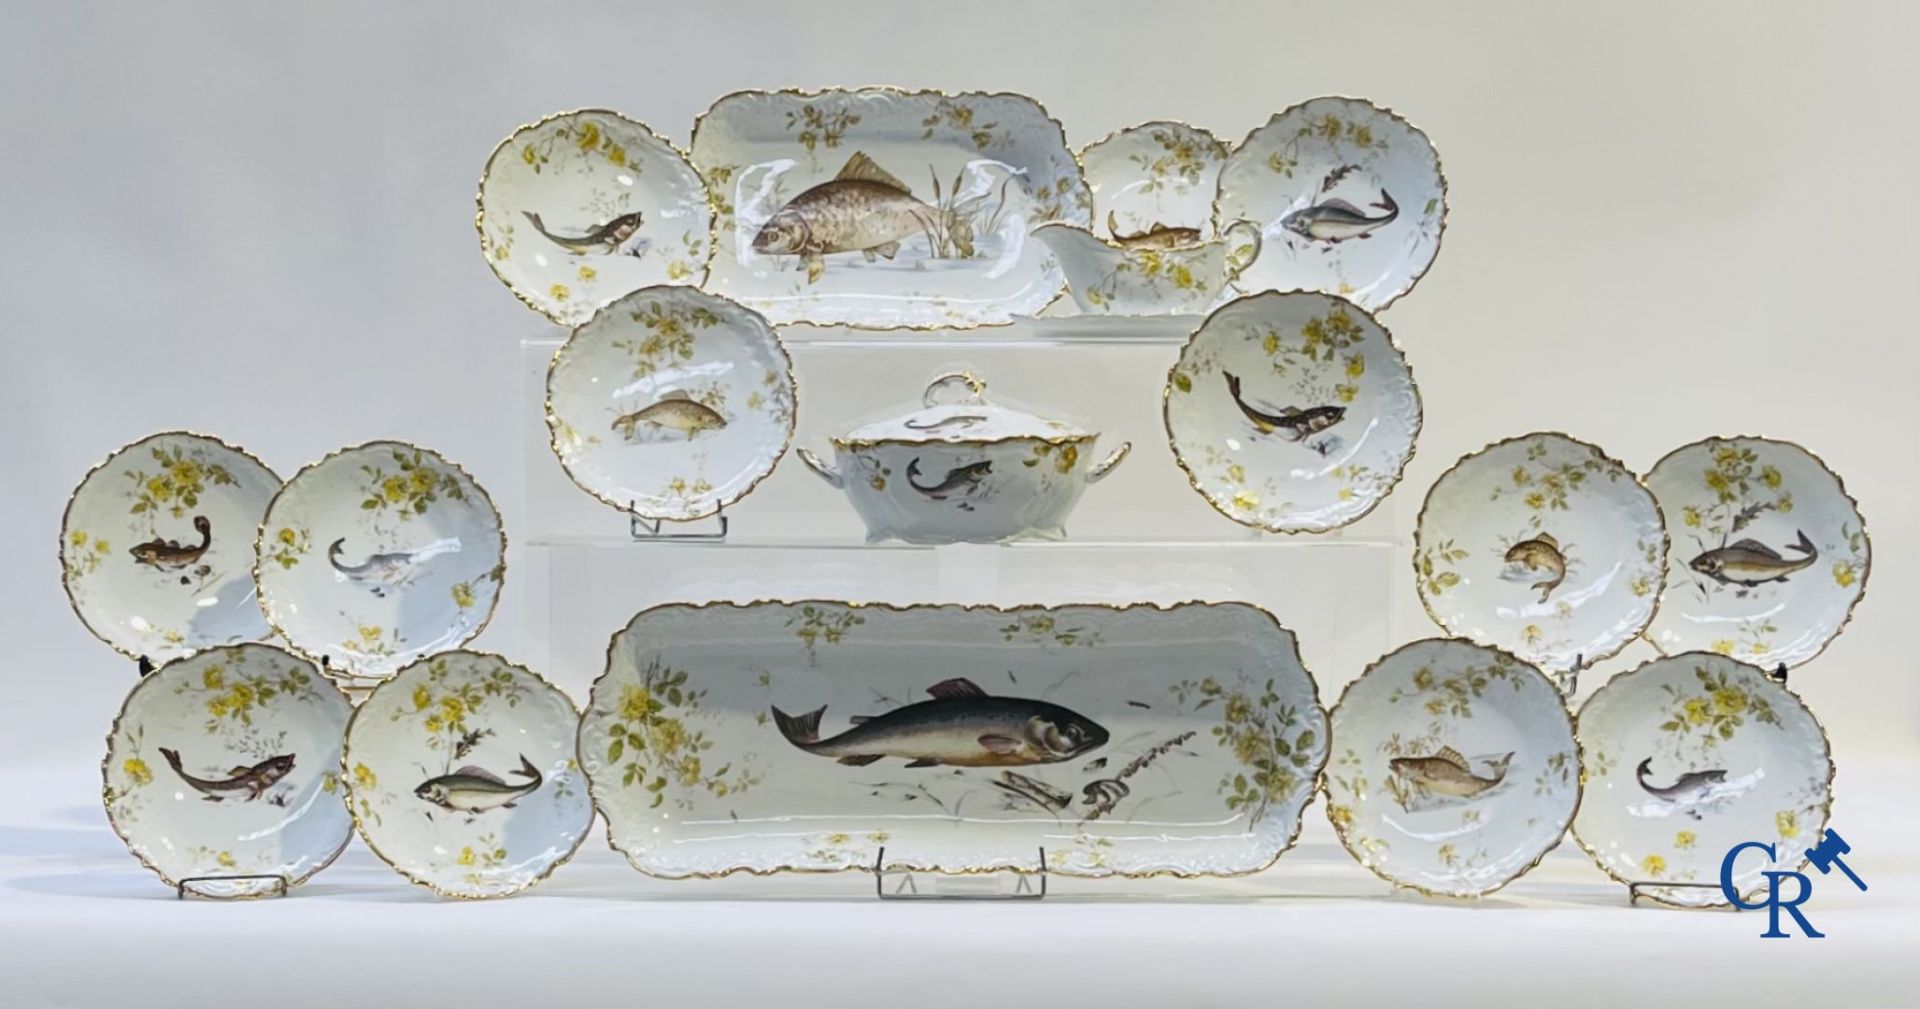 Extraordinary tableware in Brussels porcelain with a theme of freshwater fish. - Image 2 of 17